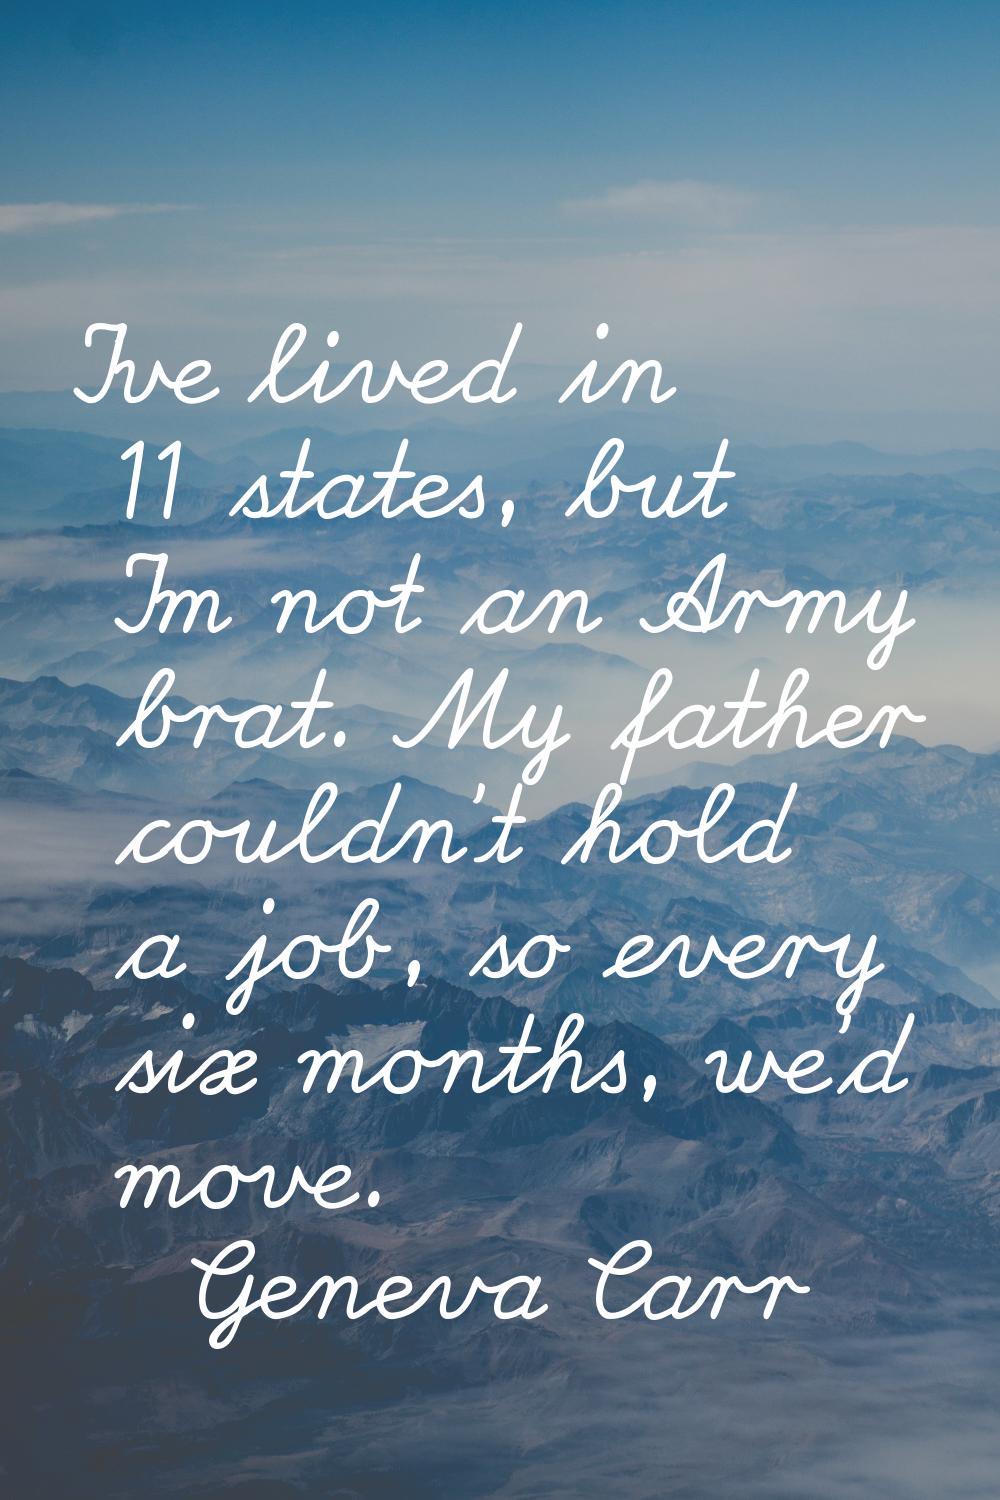 I've lived in 11 states, but I'm not an Army brat. My father couldn't hold a job, so every six mont